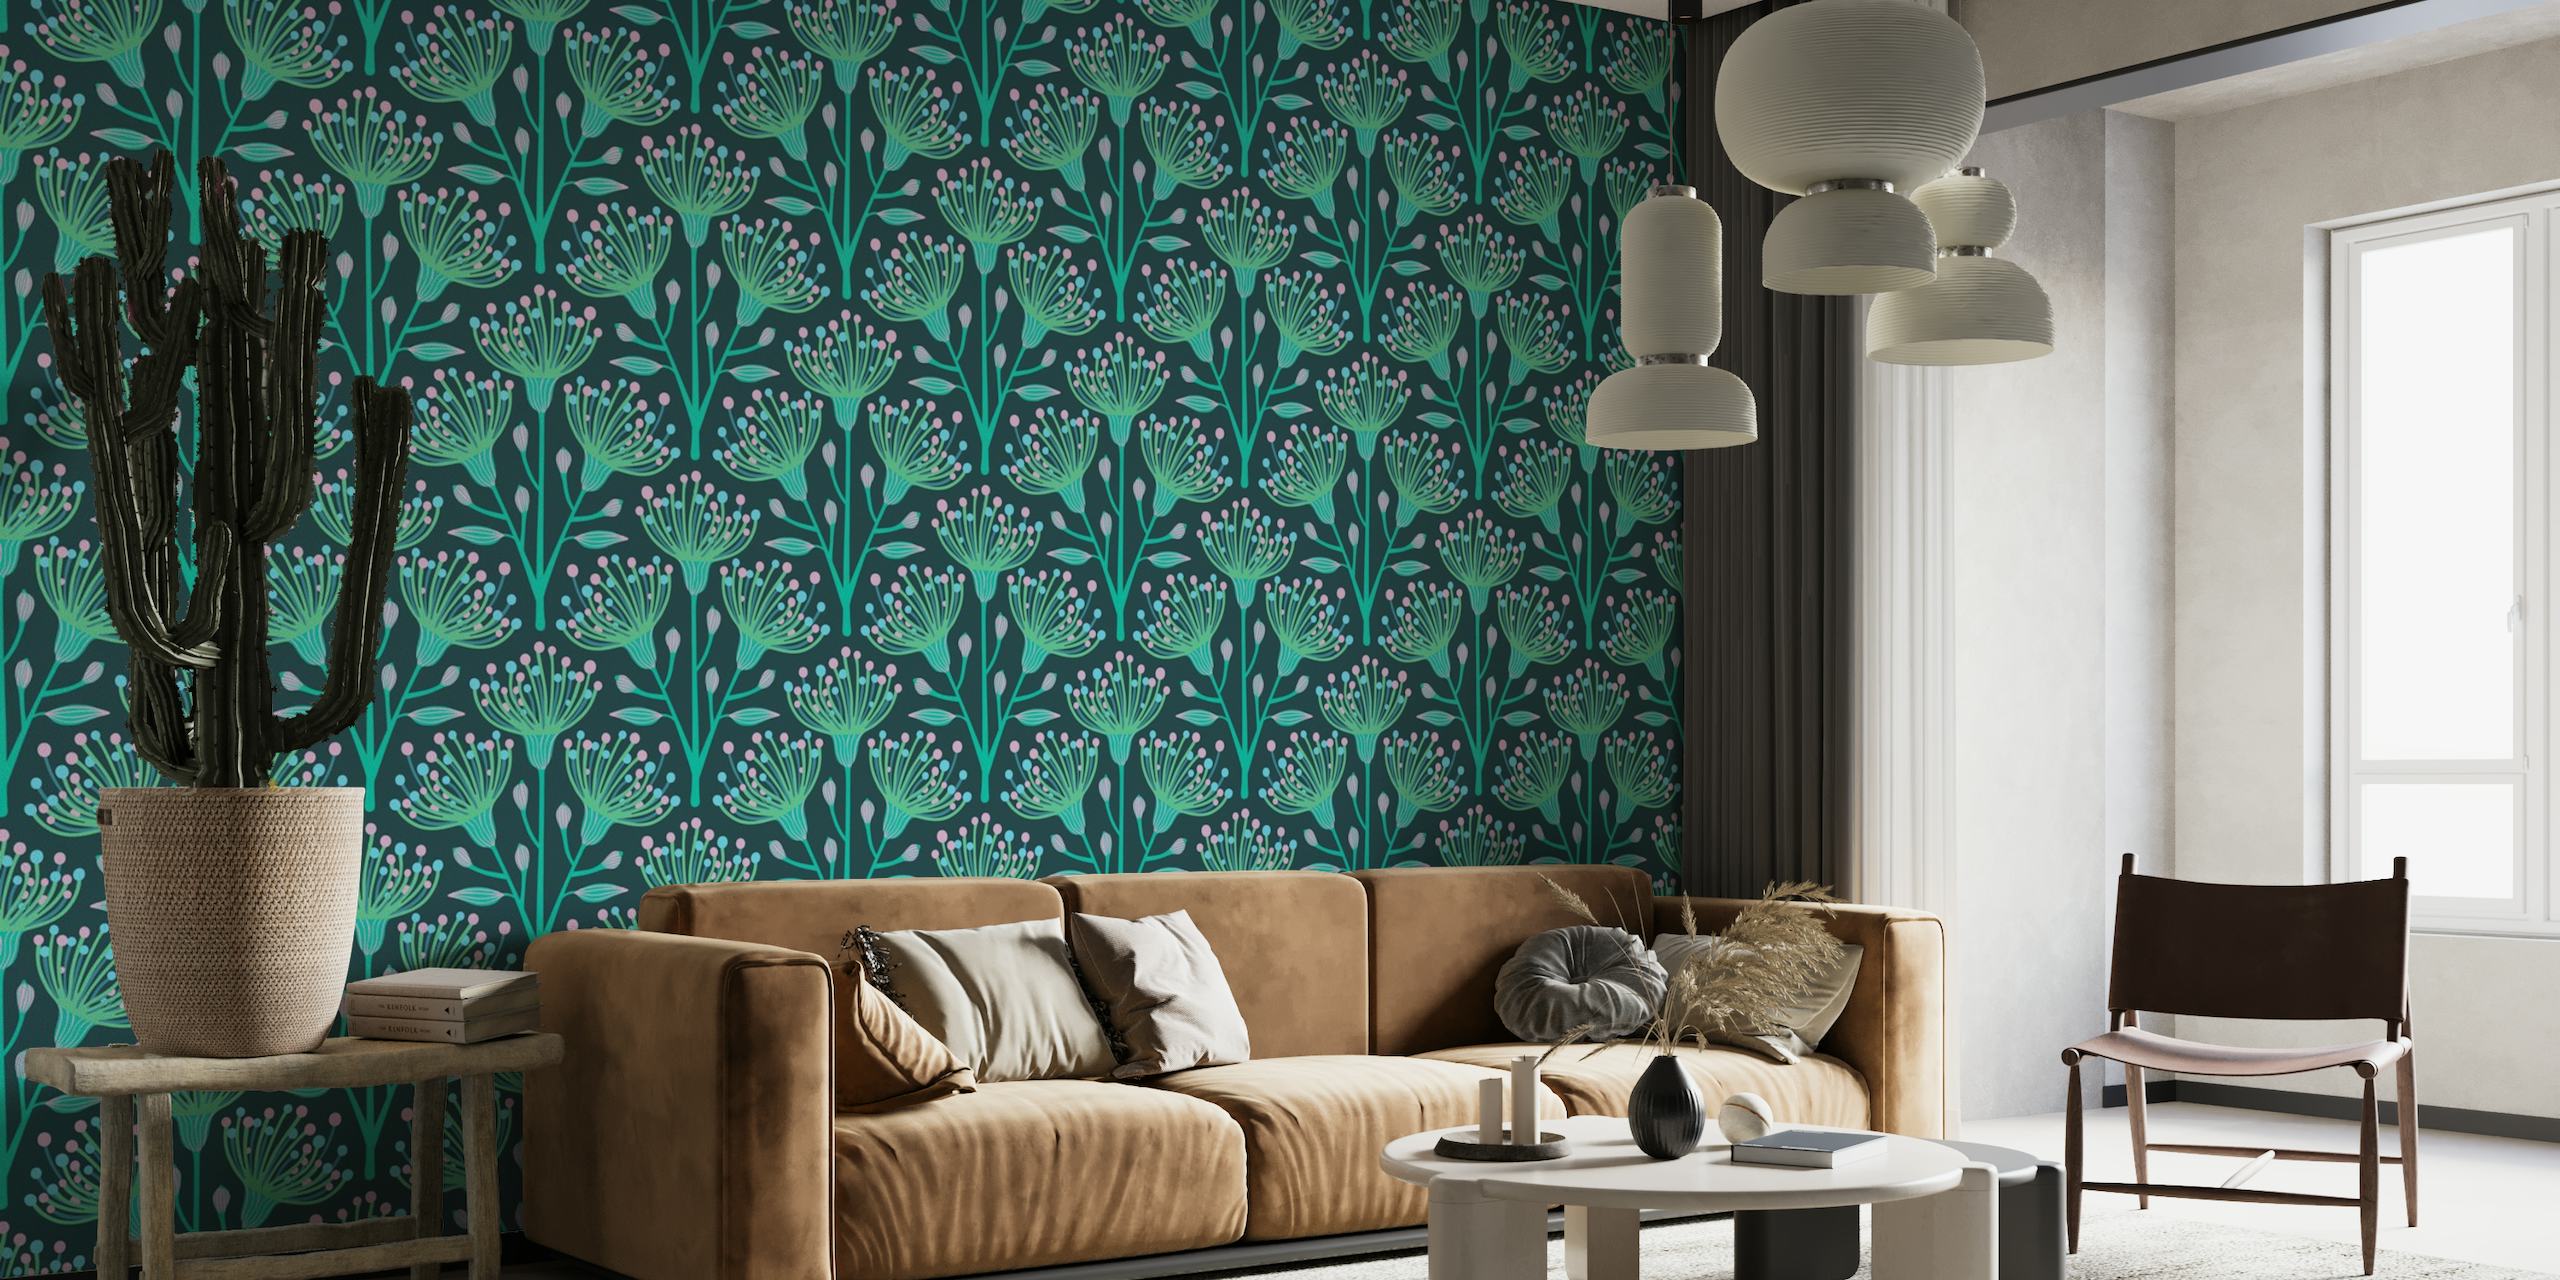 EUCALYPTUS Floral Botanical wall mural in aqua and turquoise colors displaying serene eucalyptus patterns.